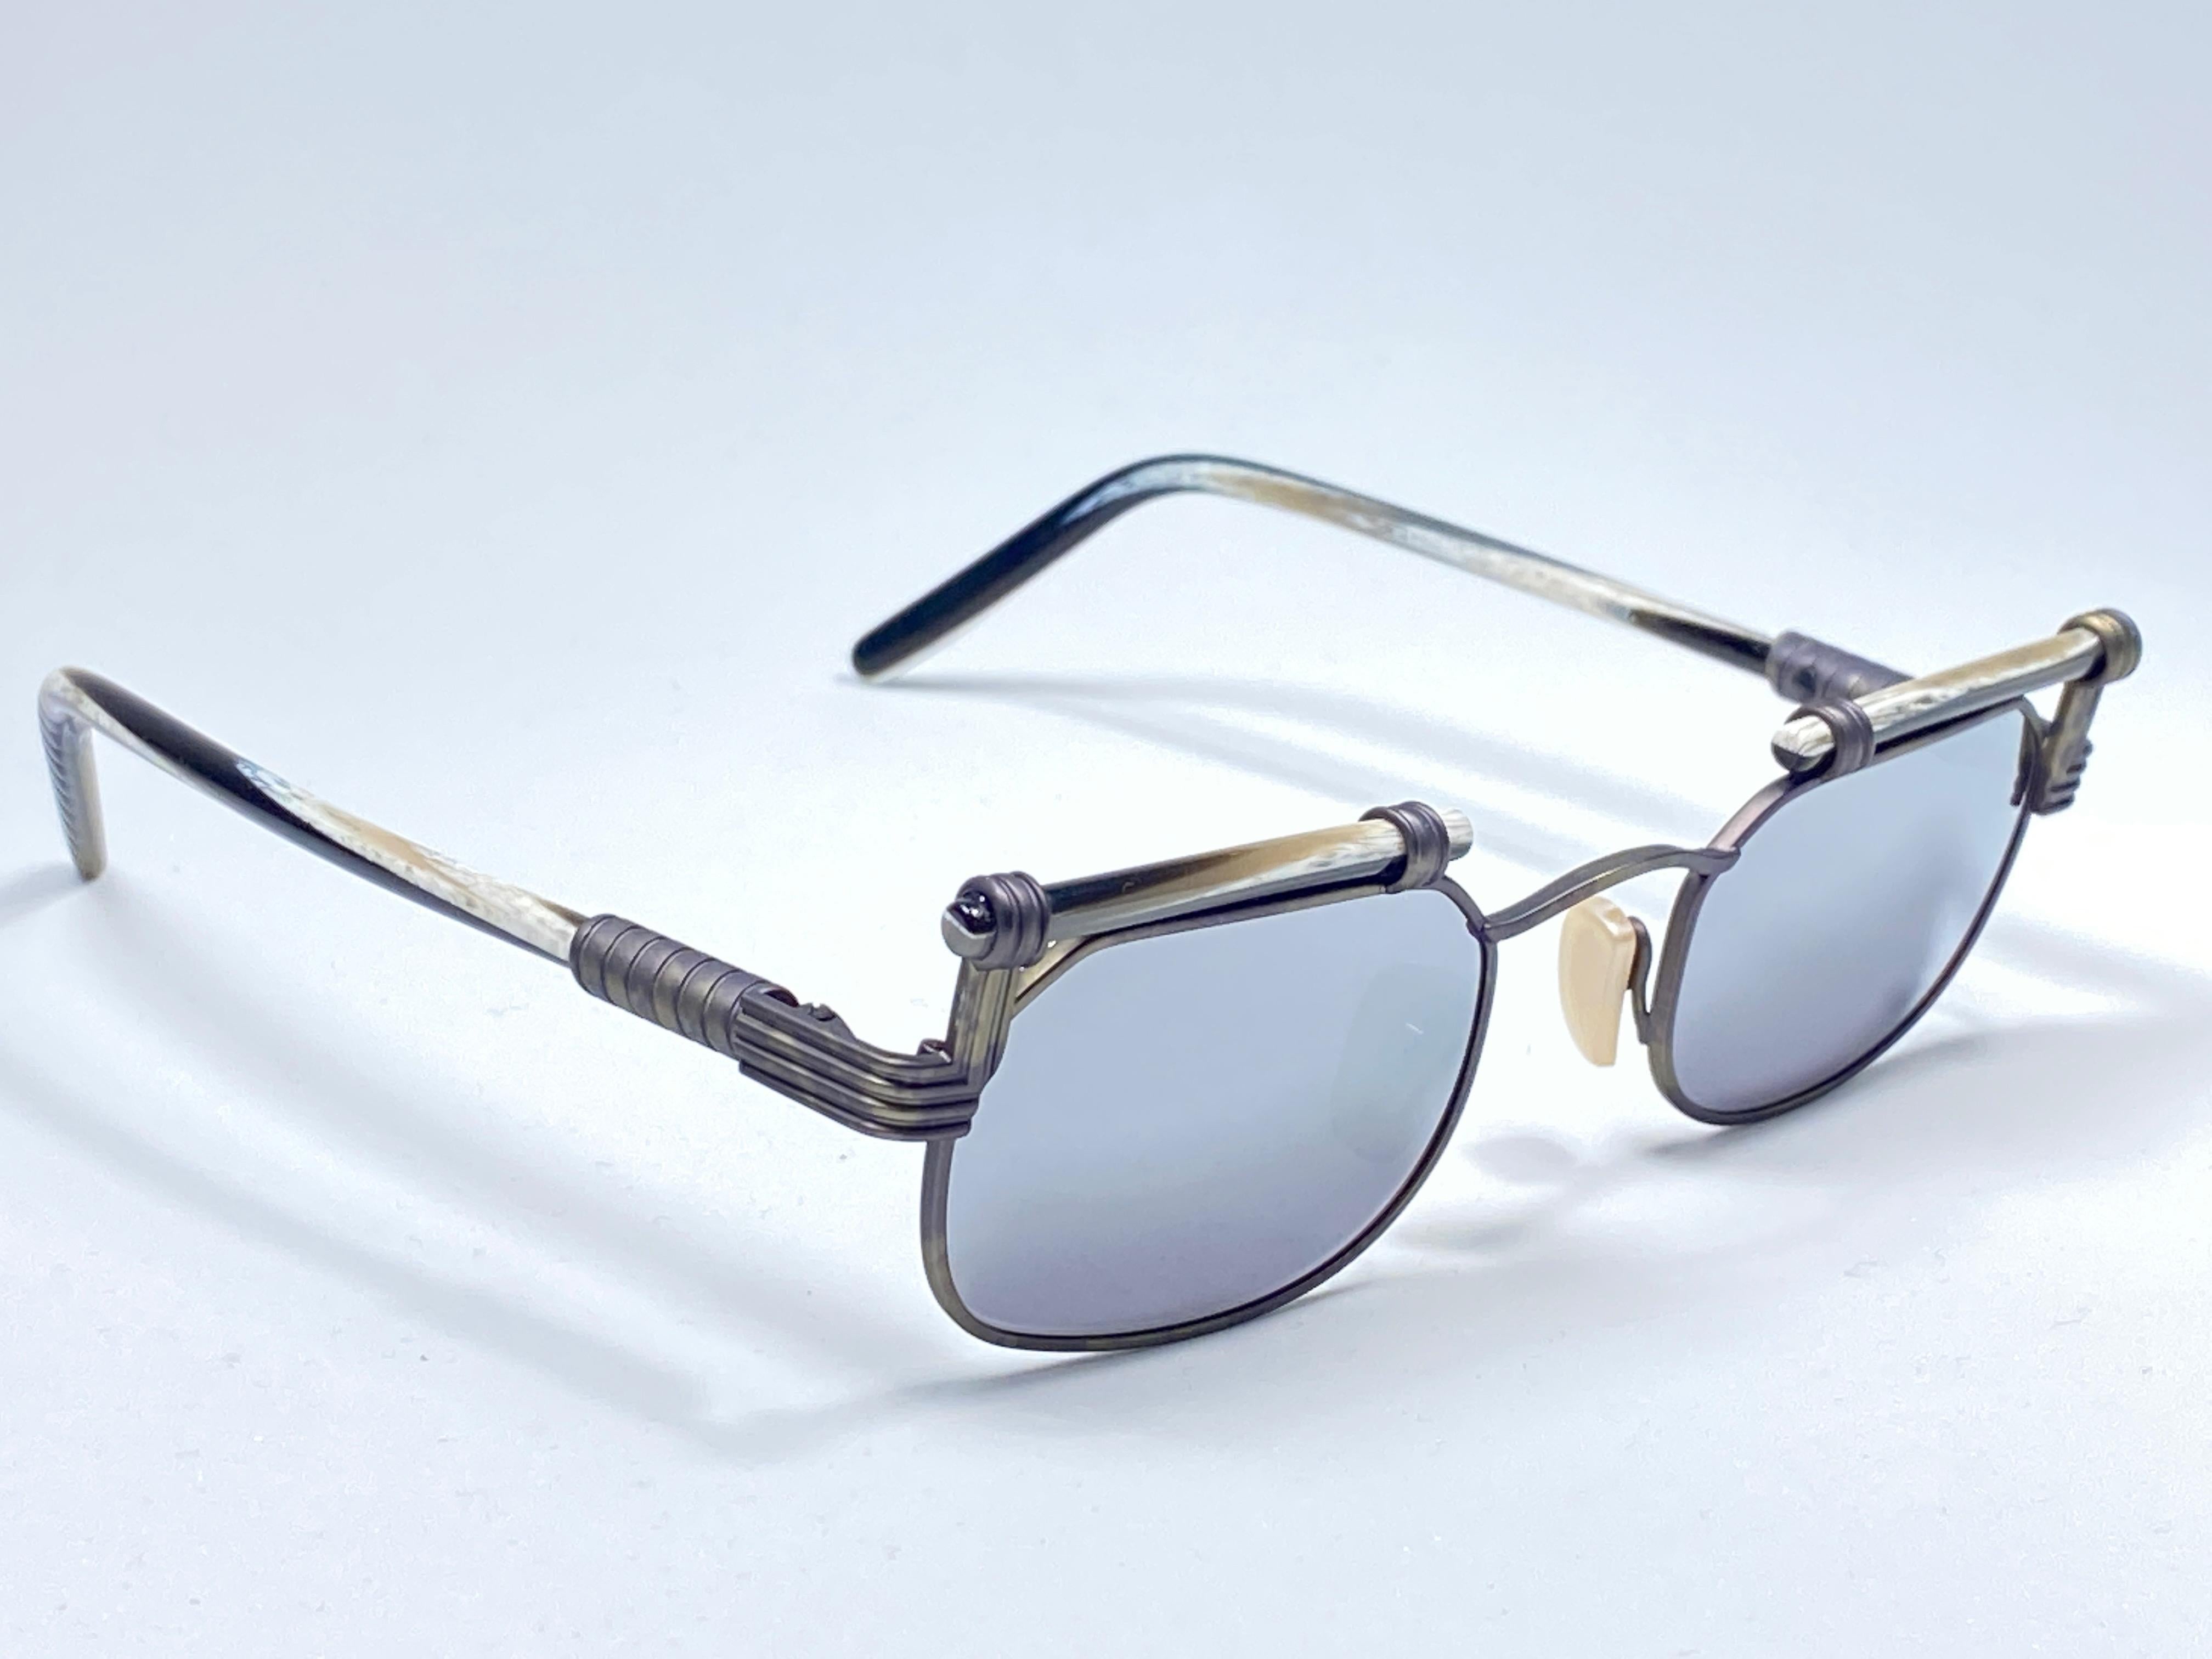 New Vintage Silhouette silver frame with bamboo effect accents holding a spotless pair of silver mirror lenses.  

Superb quality and design. this item could show minor wear due to storage.

MEASUREMENTS 

FRONT : 13 CMS 
LENS HEIGHT : 3 CMS
LENS